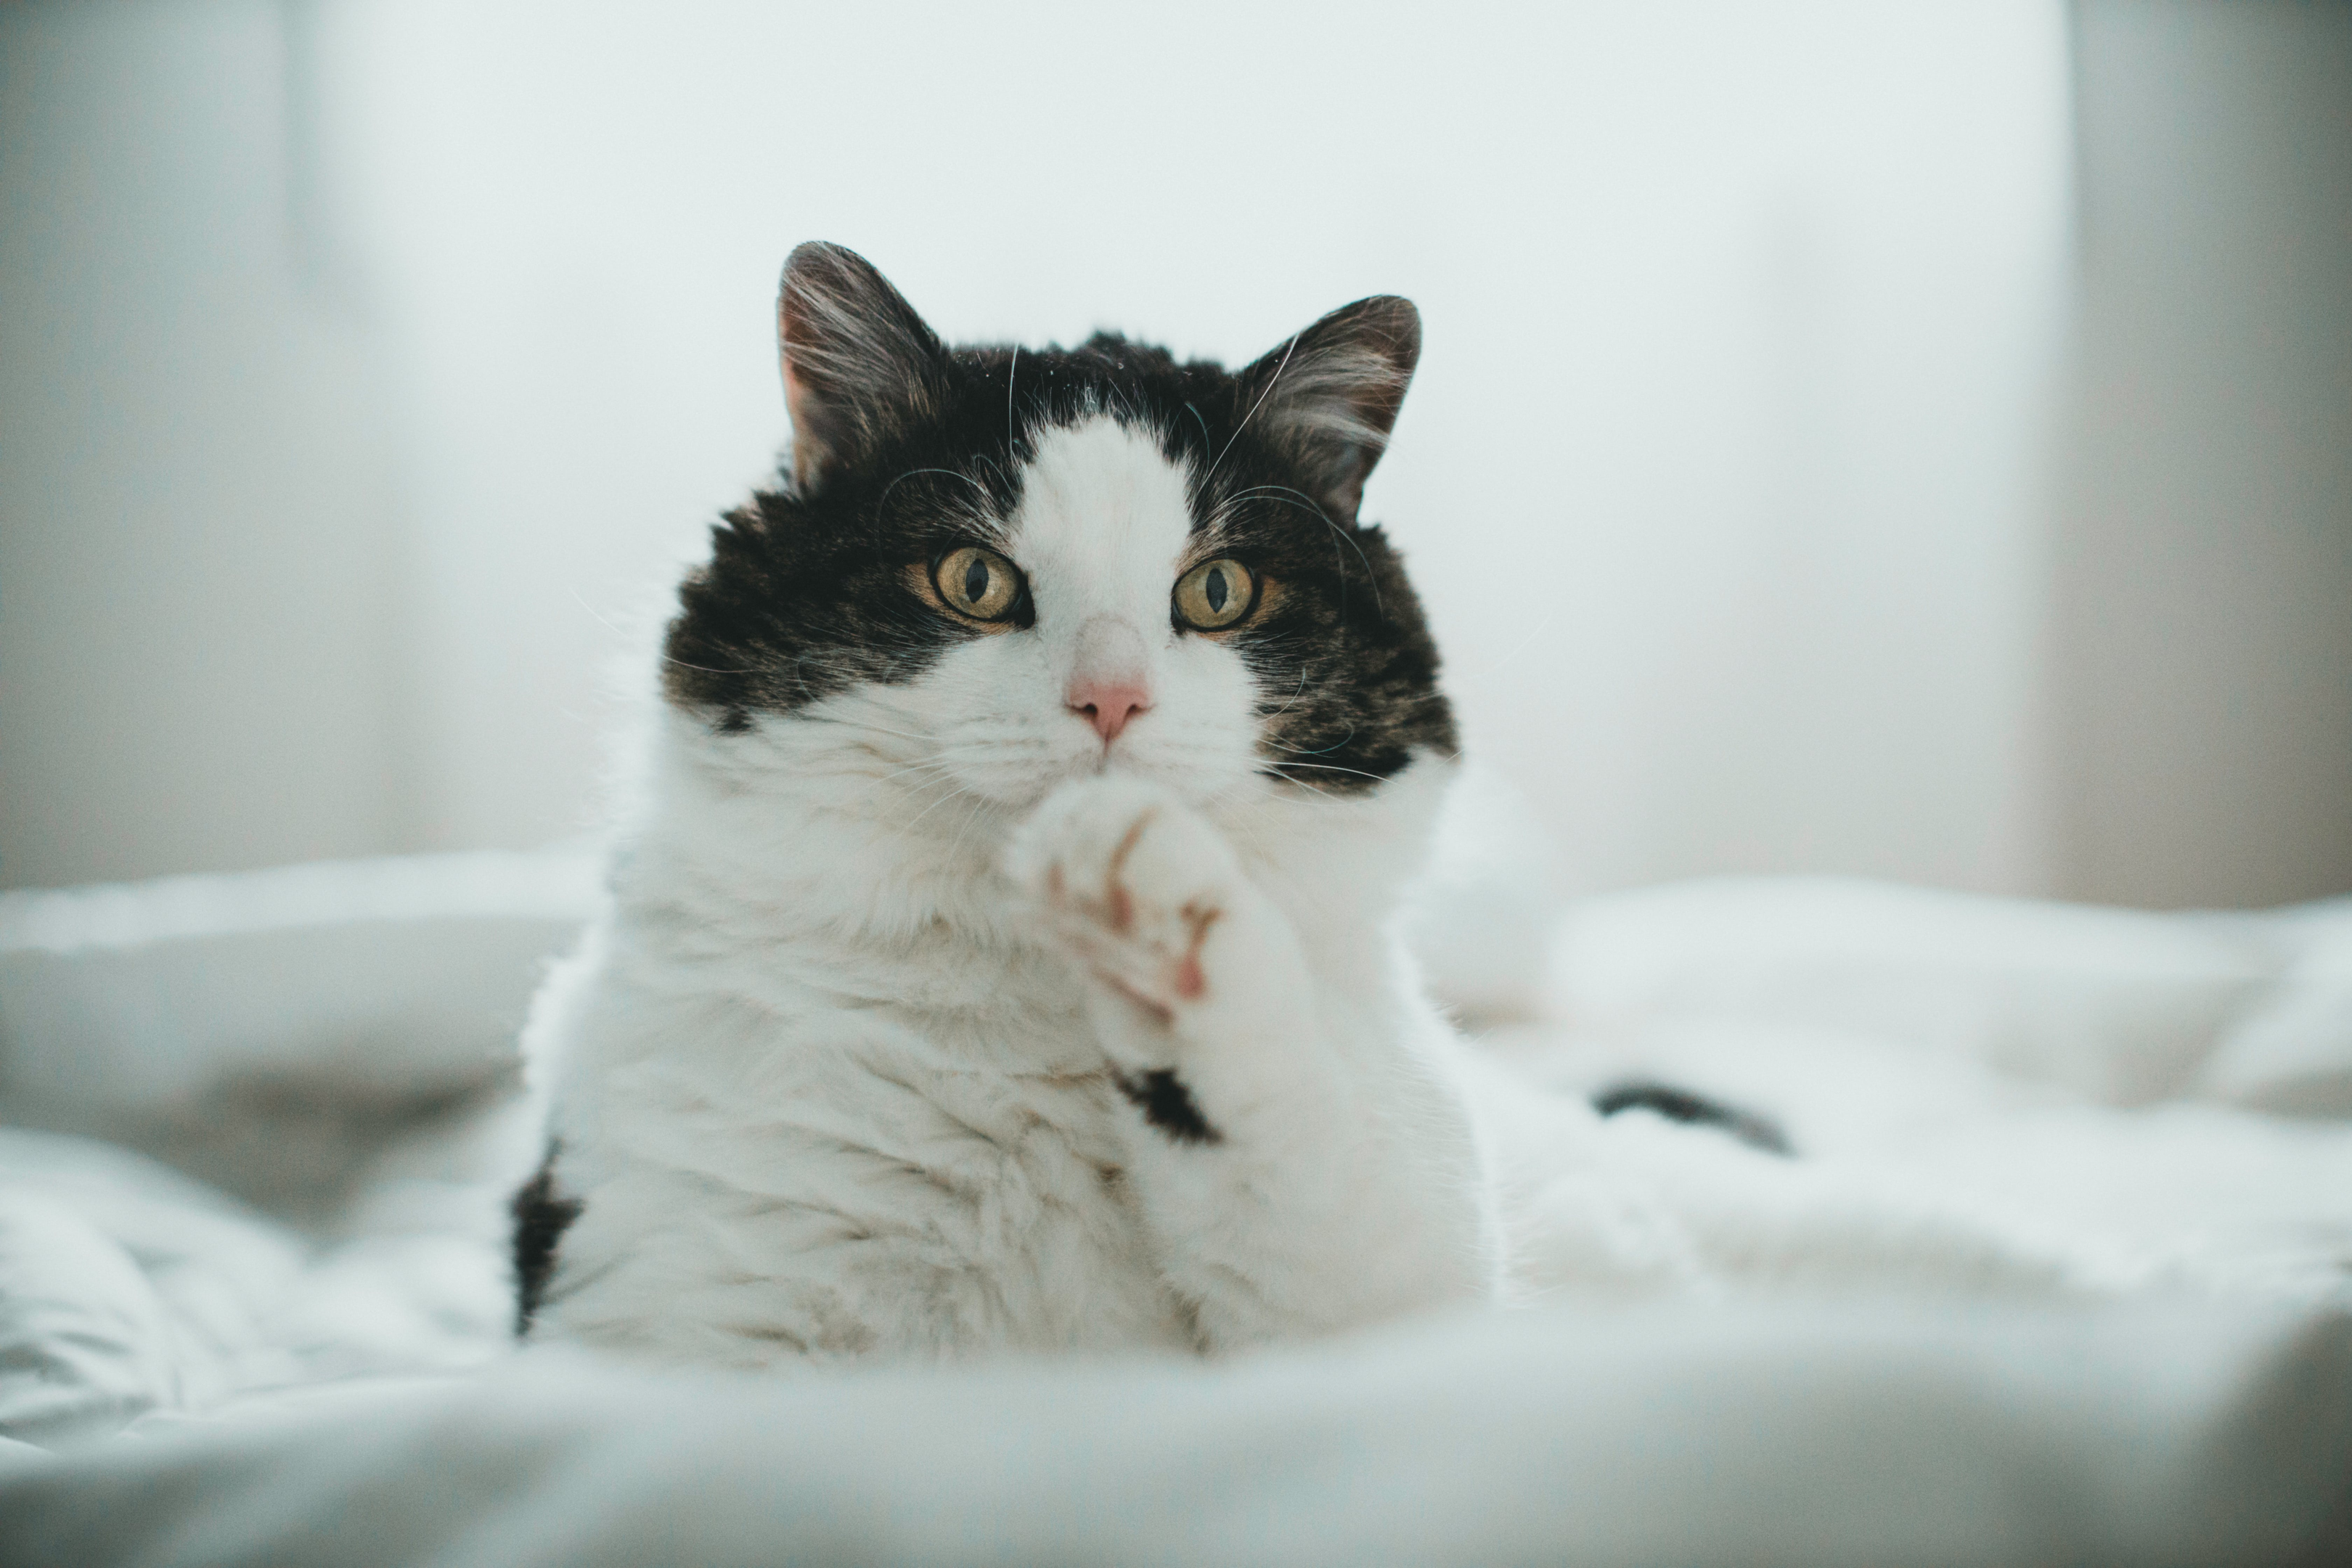 What causes cancers of the stomach in felines?